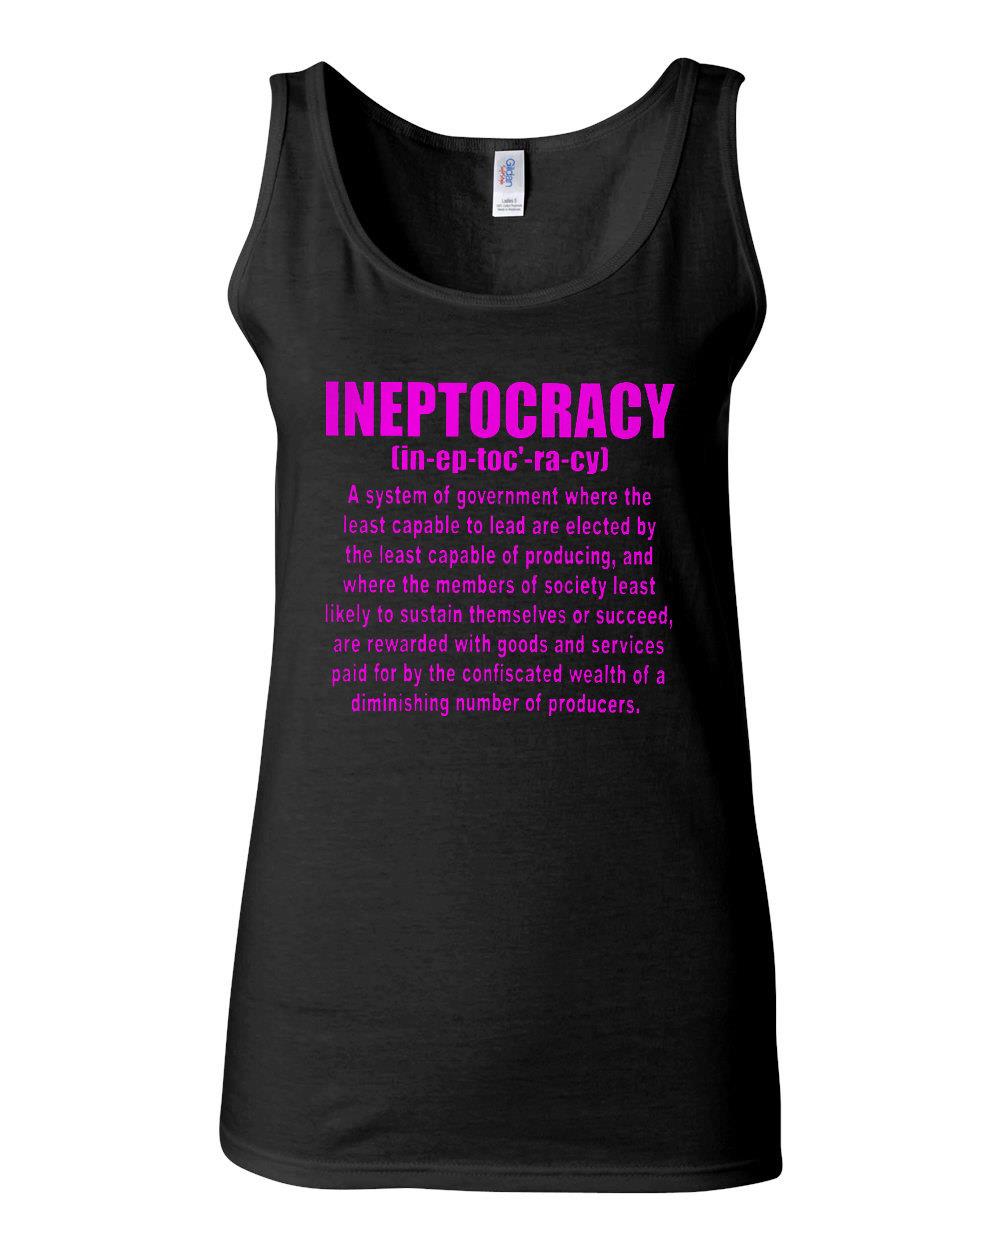 Junior Ineptocracy Government Political View Novelty Statement Sleeveless Tank Top